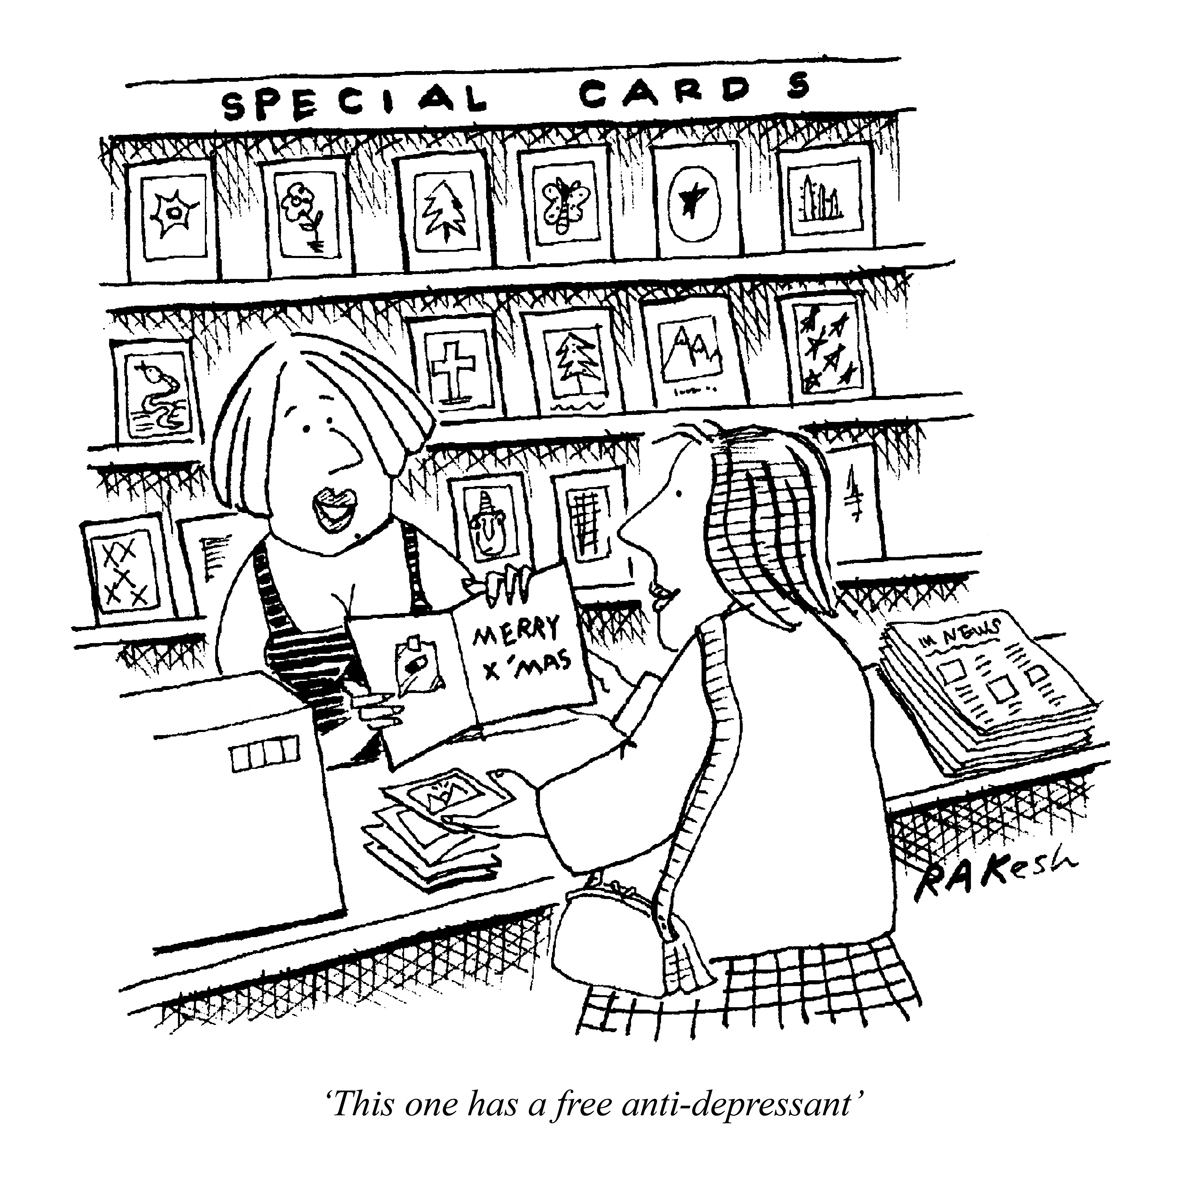 Today's PUNCH Cartoon Classic. ‘This one has a free anti-depressant.’ Rakesh Sahgal 1991 #Christmas #Christmascards #shopping #shoppers #retail #shops #stores #consumers #promotions #Xmas #consumers